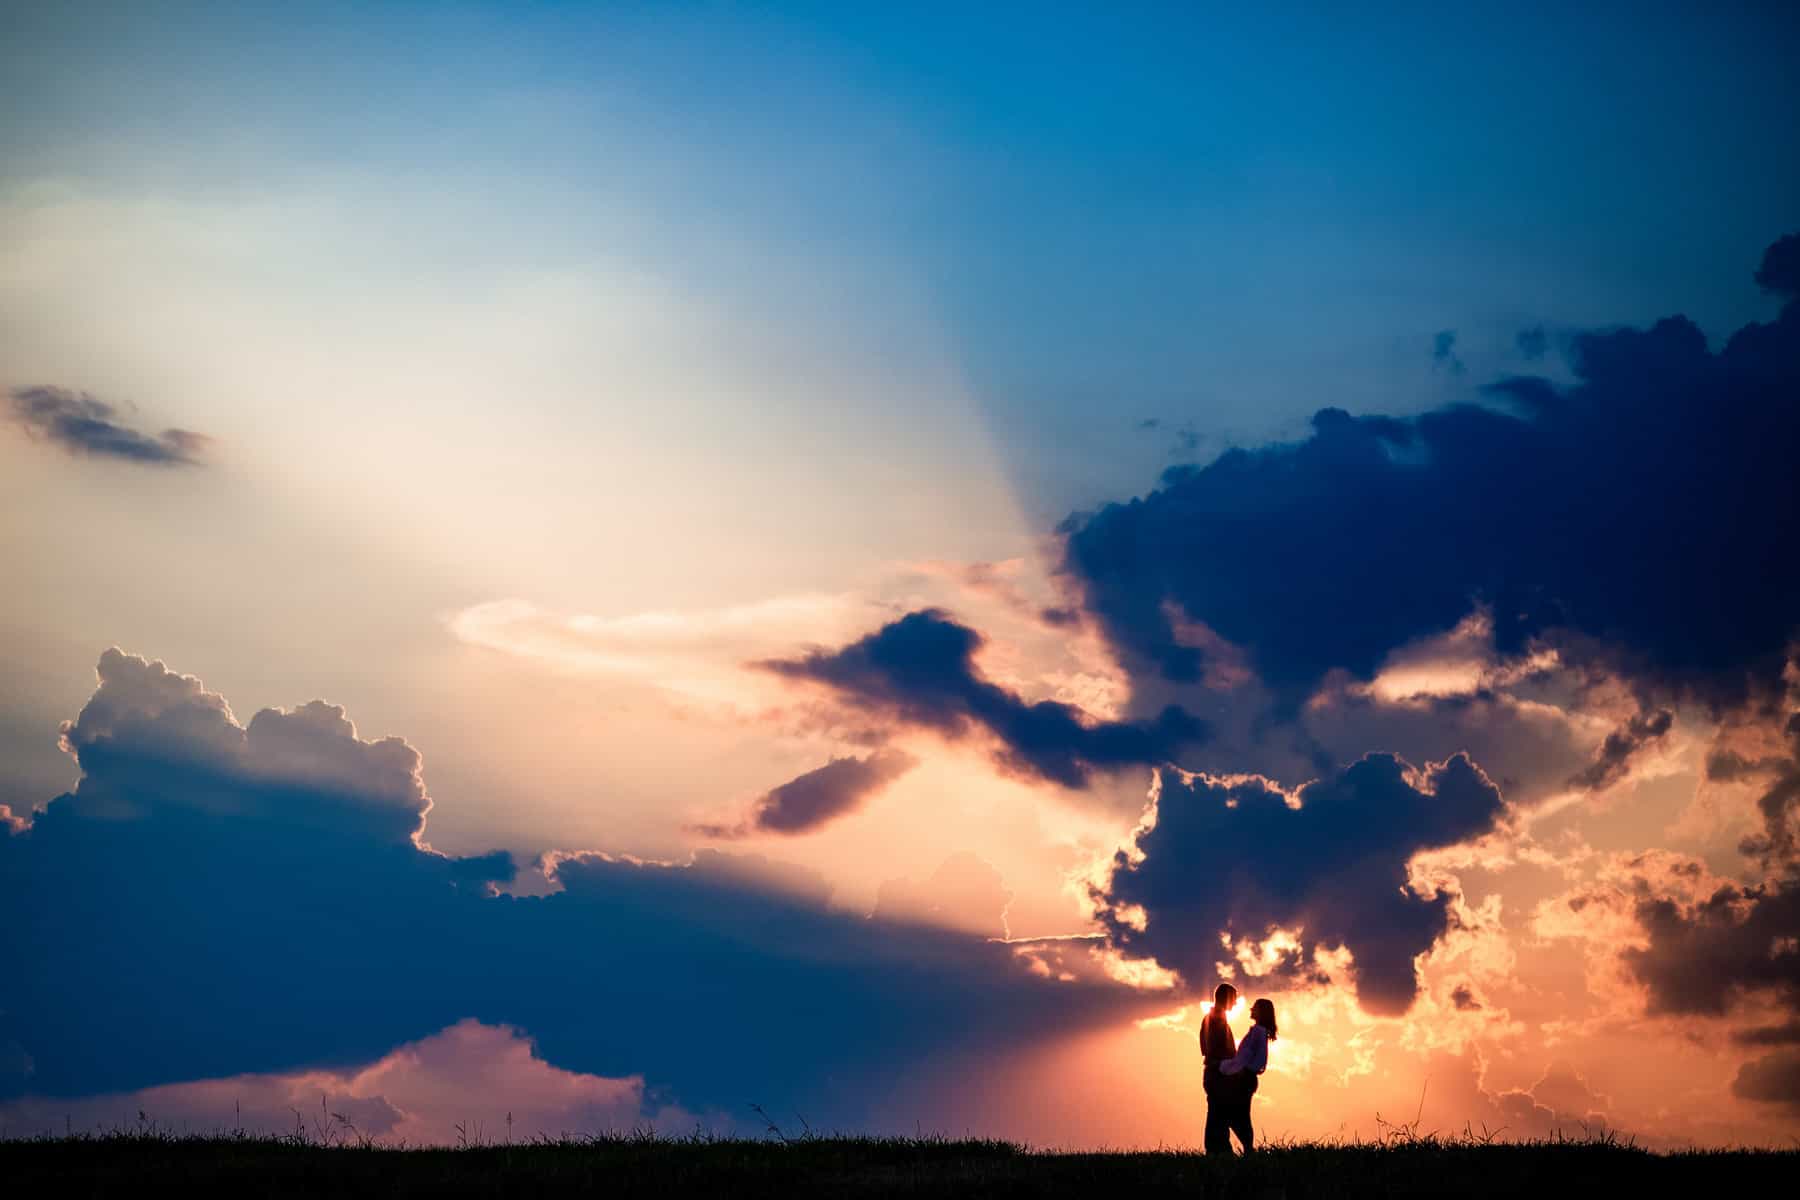 A silhouette of a person standing on a field at sunset.